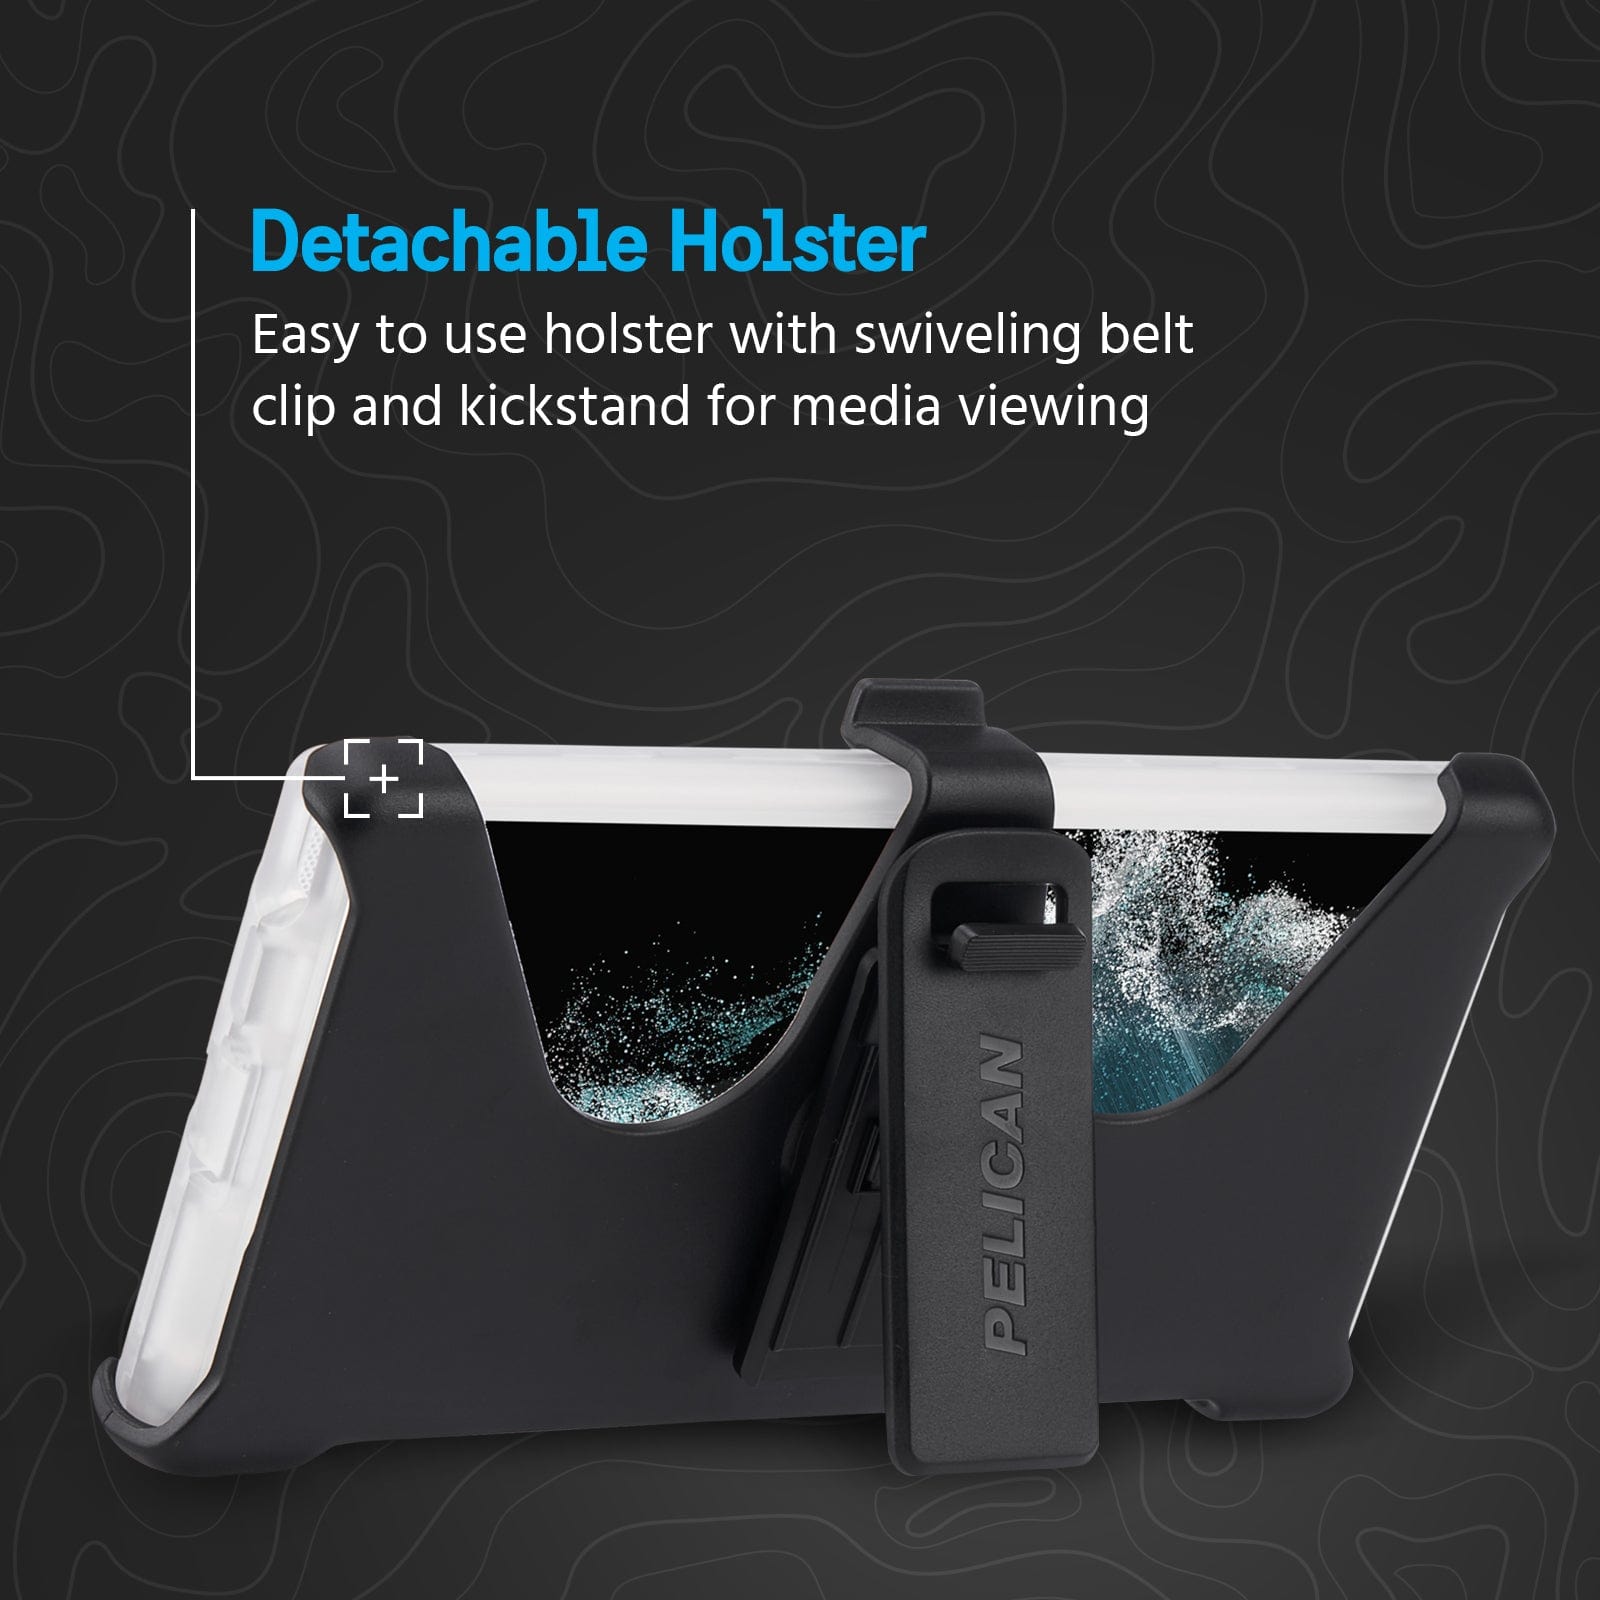 DETACHABLE HOLSTER. EASY TO USE HOLSTER WITH SWIVELING BELT CLIP AND KICKSTAND FOR MEDIA VIEWING.